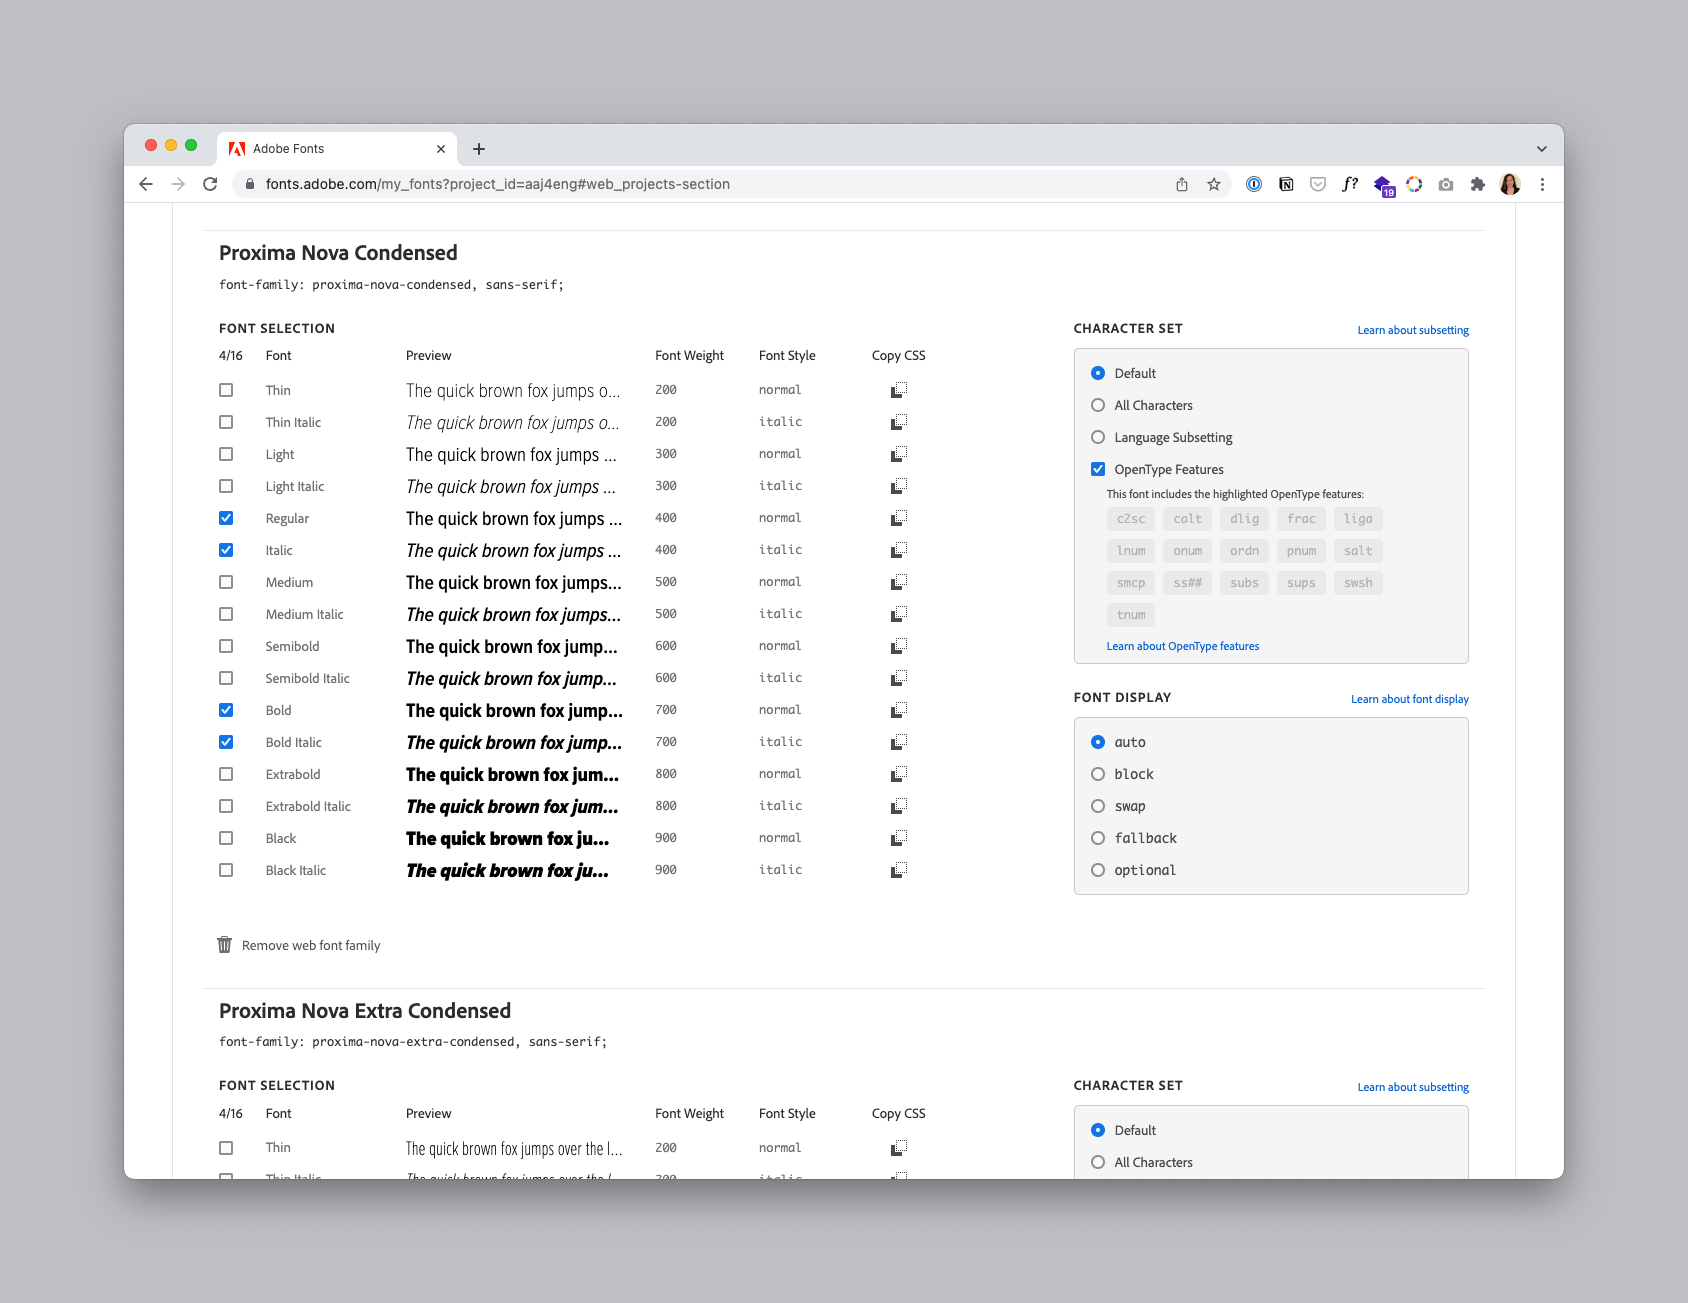 The "Edit Details" view shows a list of all fonts in a project. Users can toggle fonts on and off or delete font families entirely.